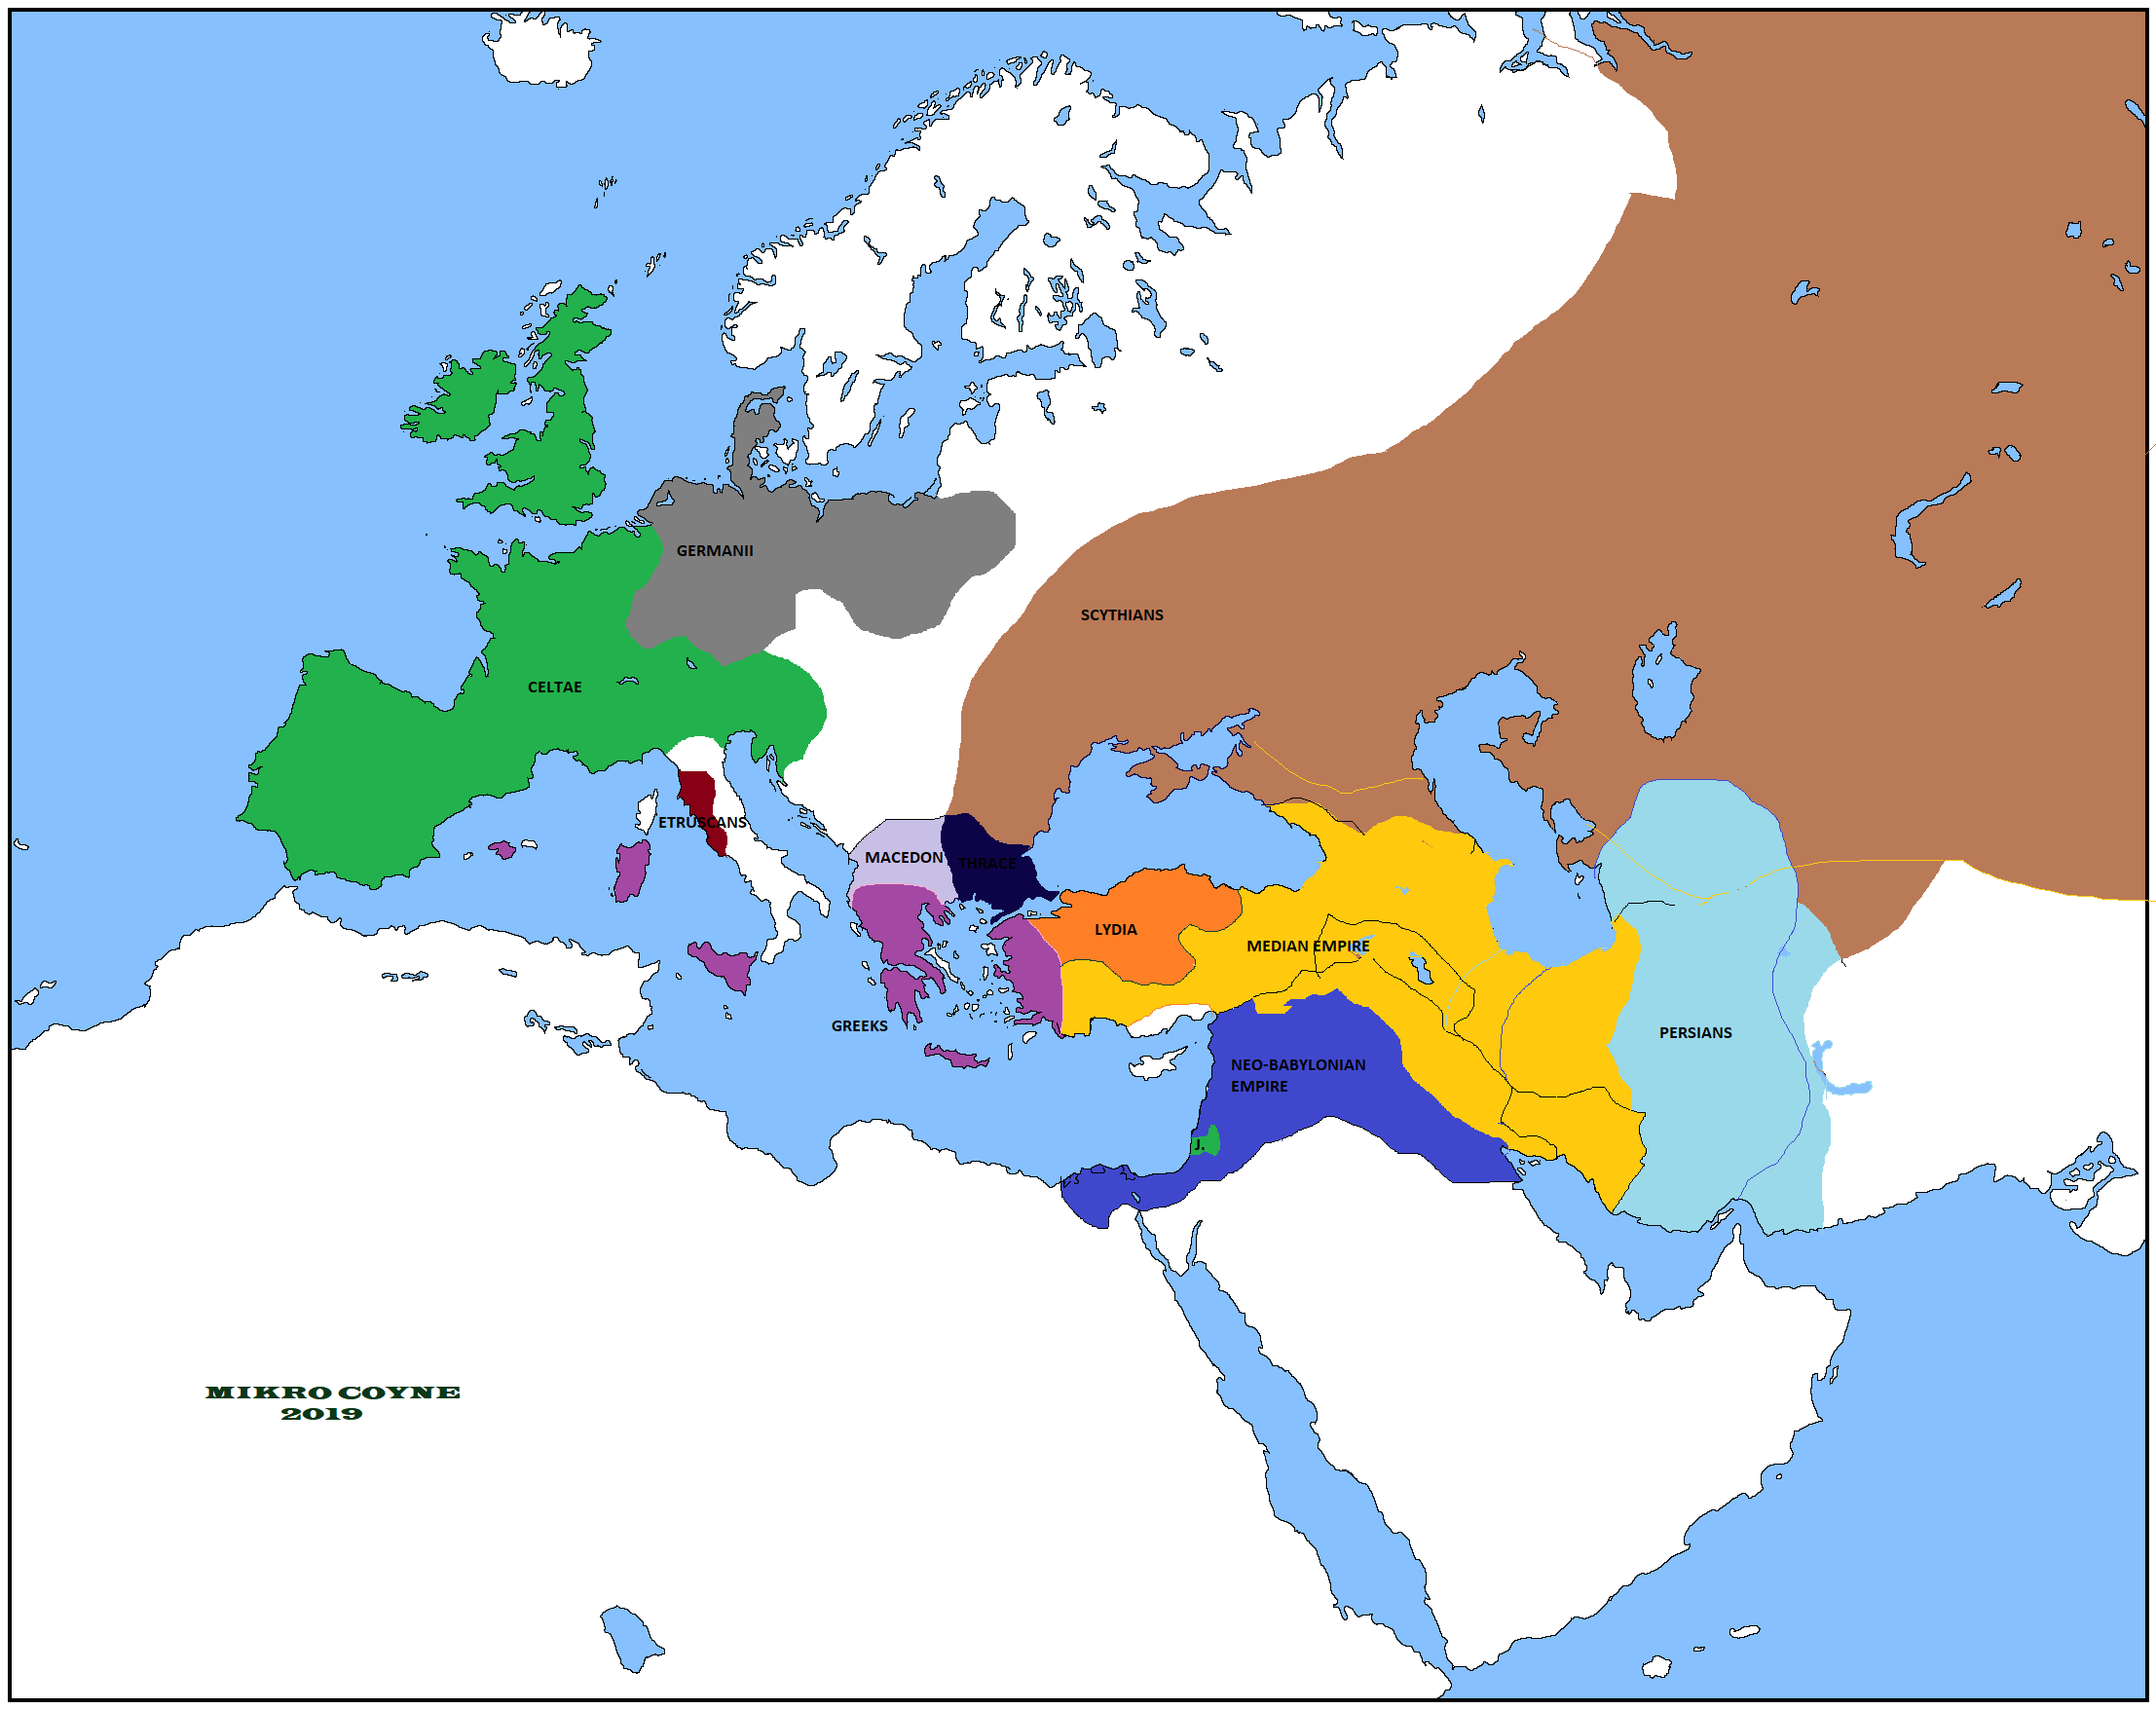 assyrian empire and elam 4.png